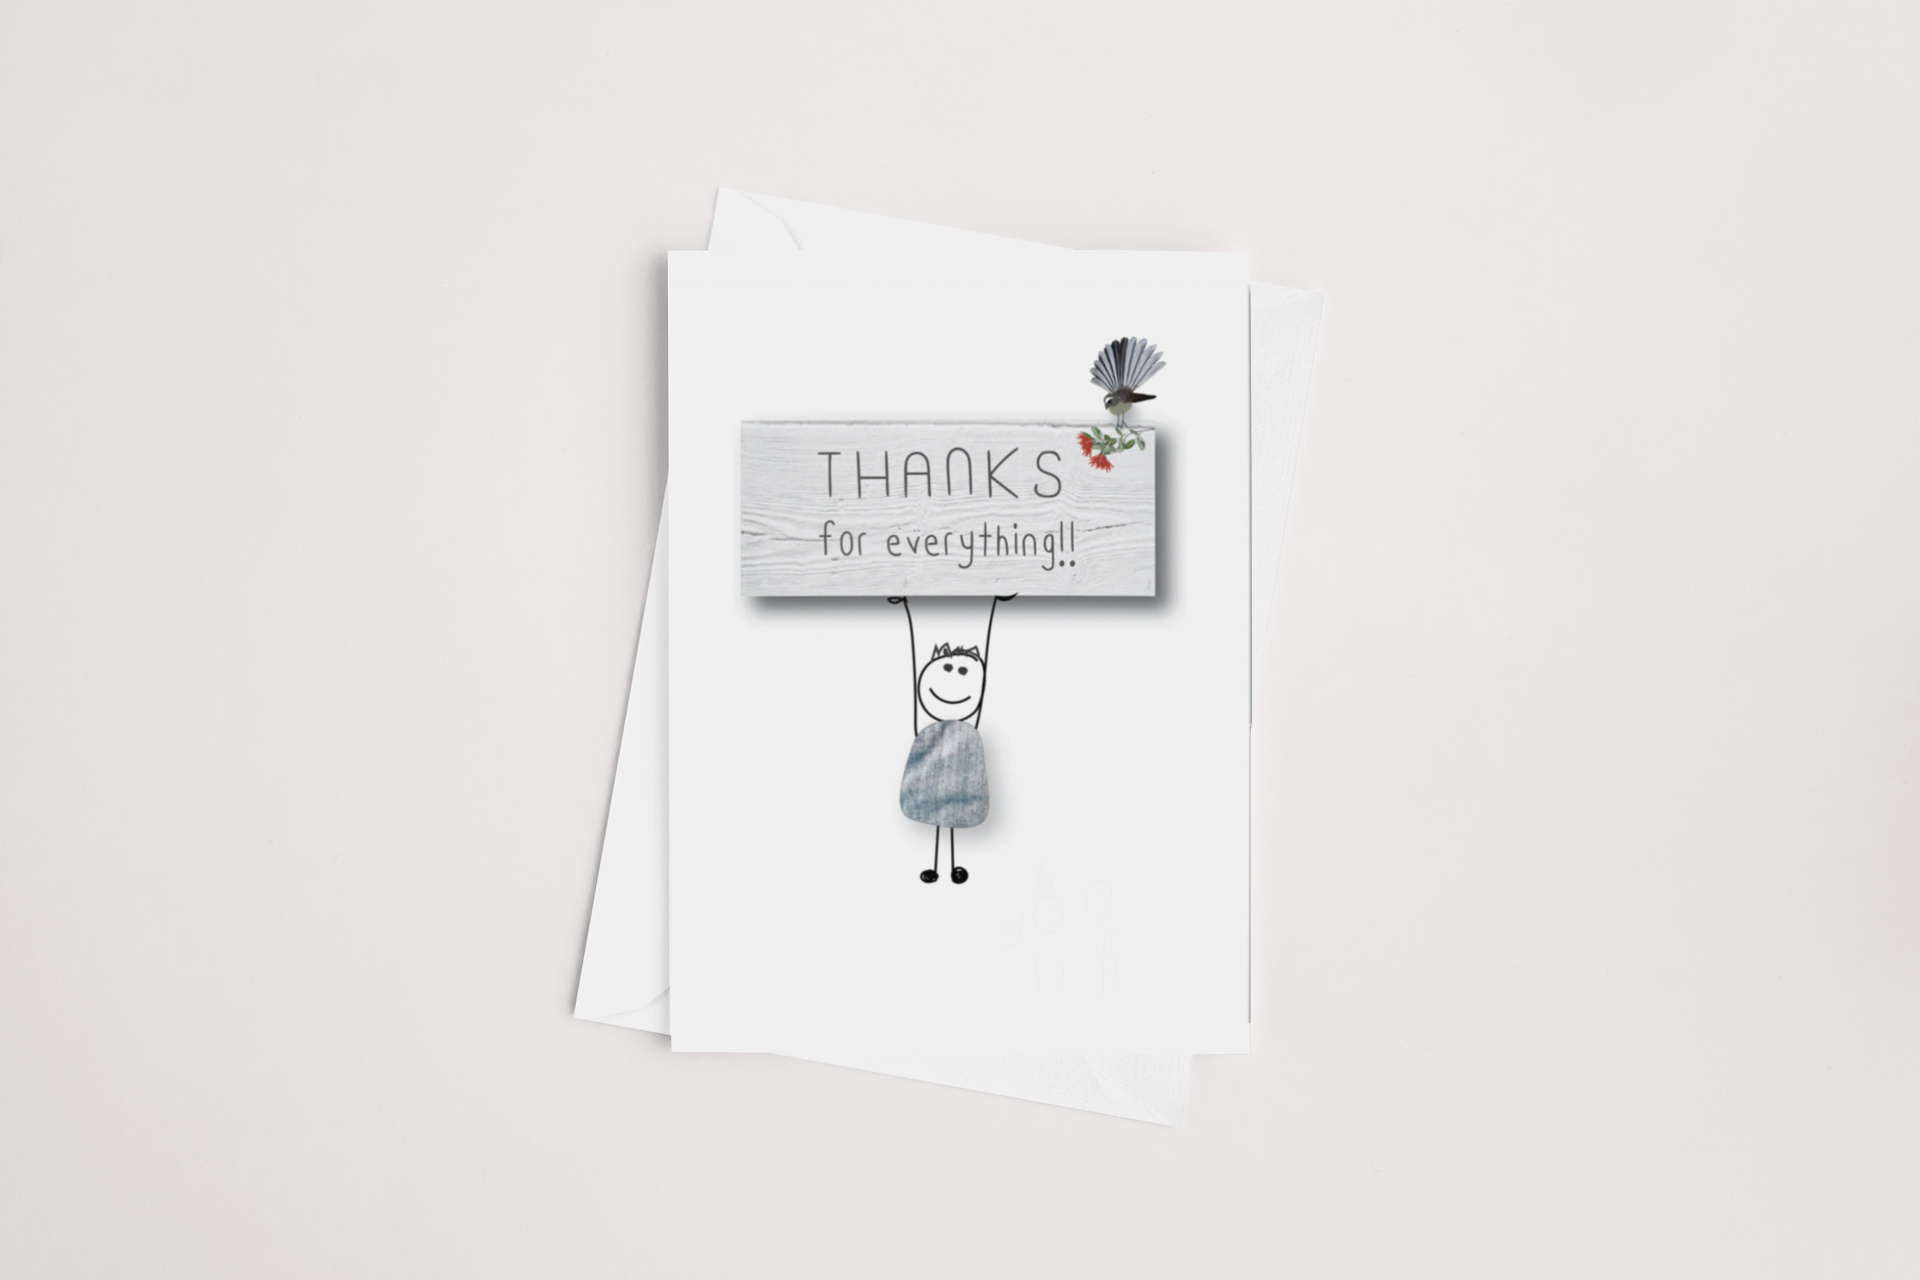 A whimsical Thanks for Everything Card from icandy New Zealand featuring a playful illustration and the cheerful message "thanks for everything!" pinned on a stack of white paper.